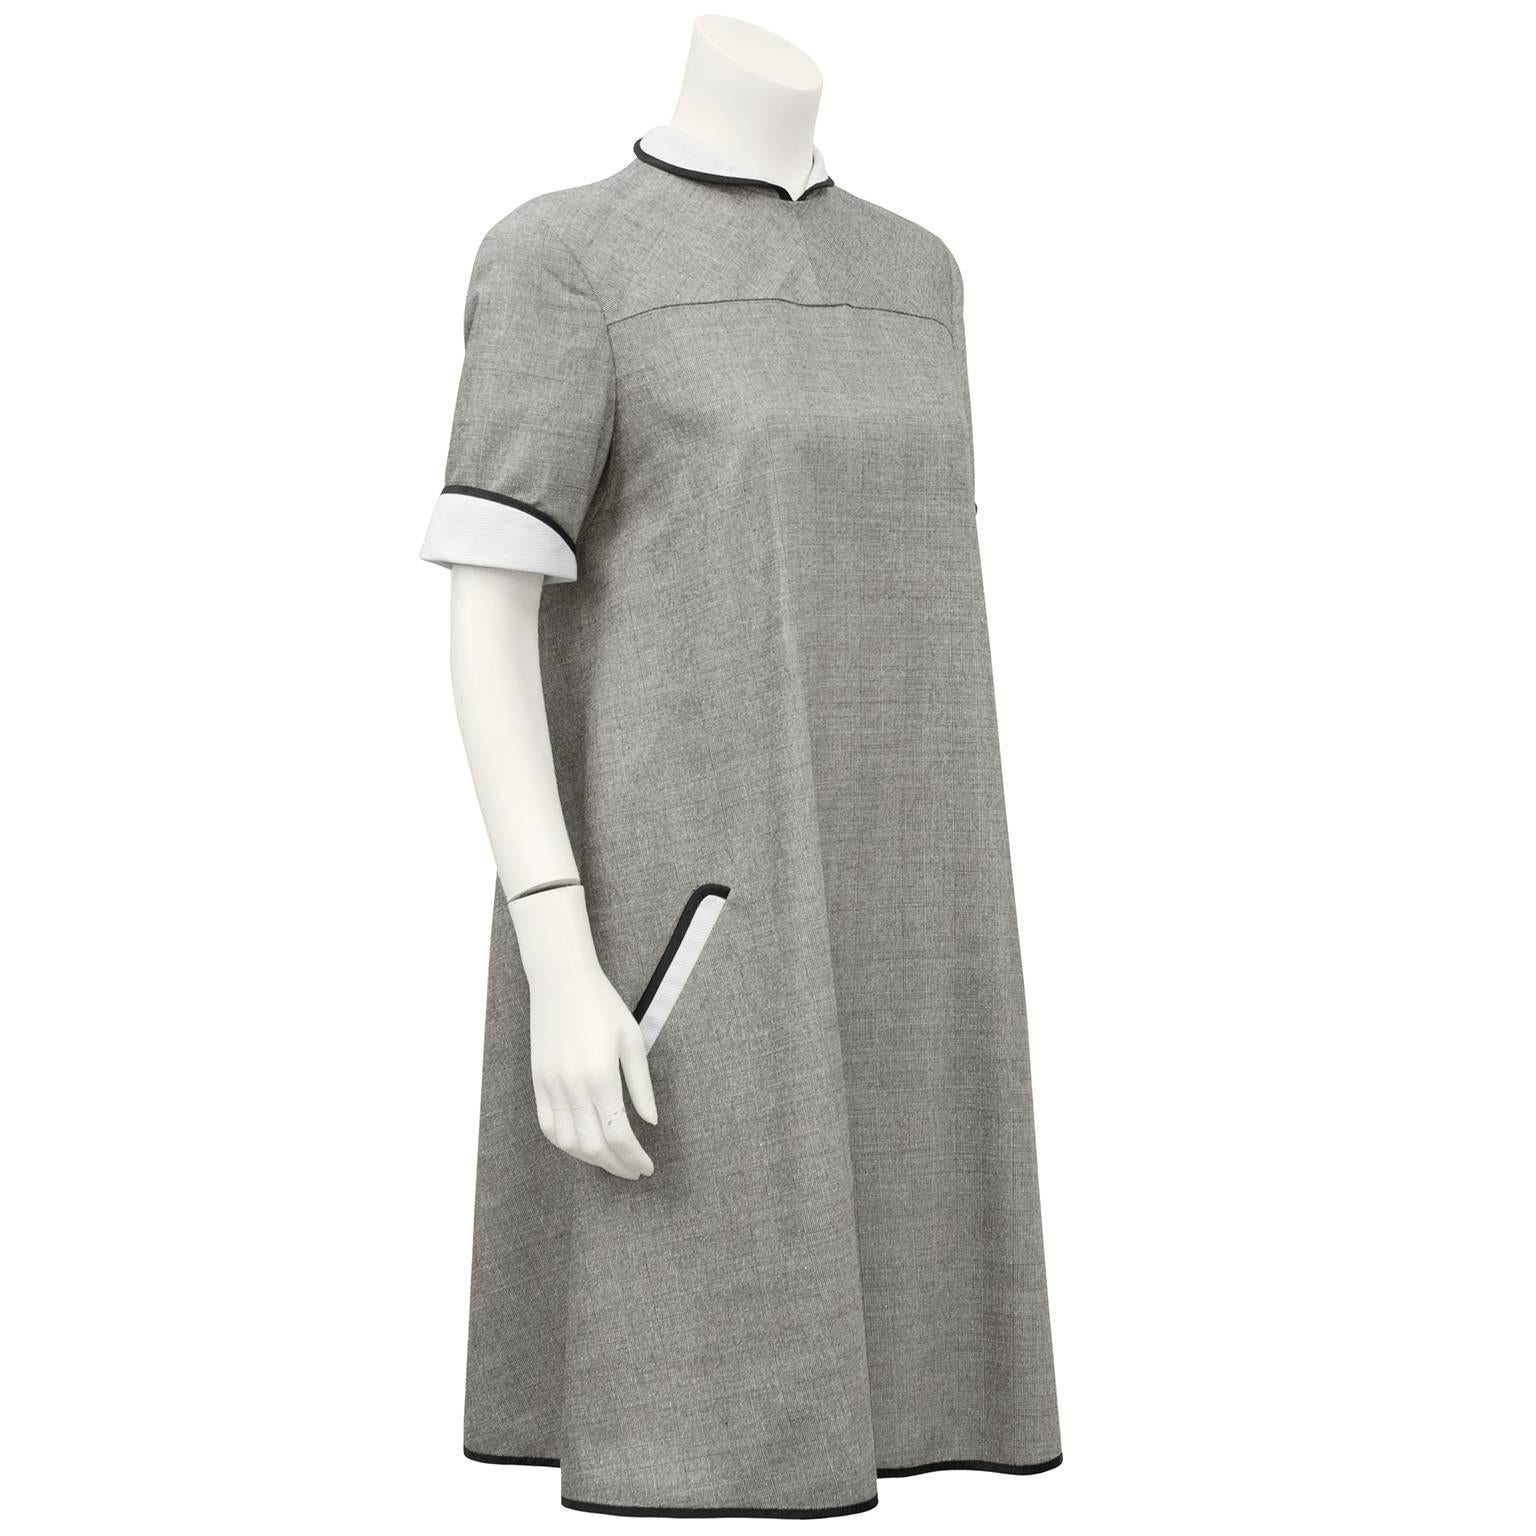 Darling 1980's Geoffrey Beene grey, black and white light weight wool glen check swing dress. Contrasting white cotton waffle fabric with black silk ribbon trim on  peter pan collar, pocket and short sleeves. Inverted pleats hang beautifully at back